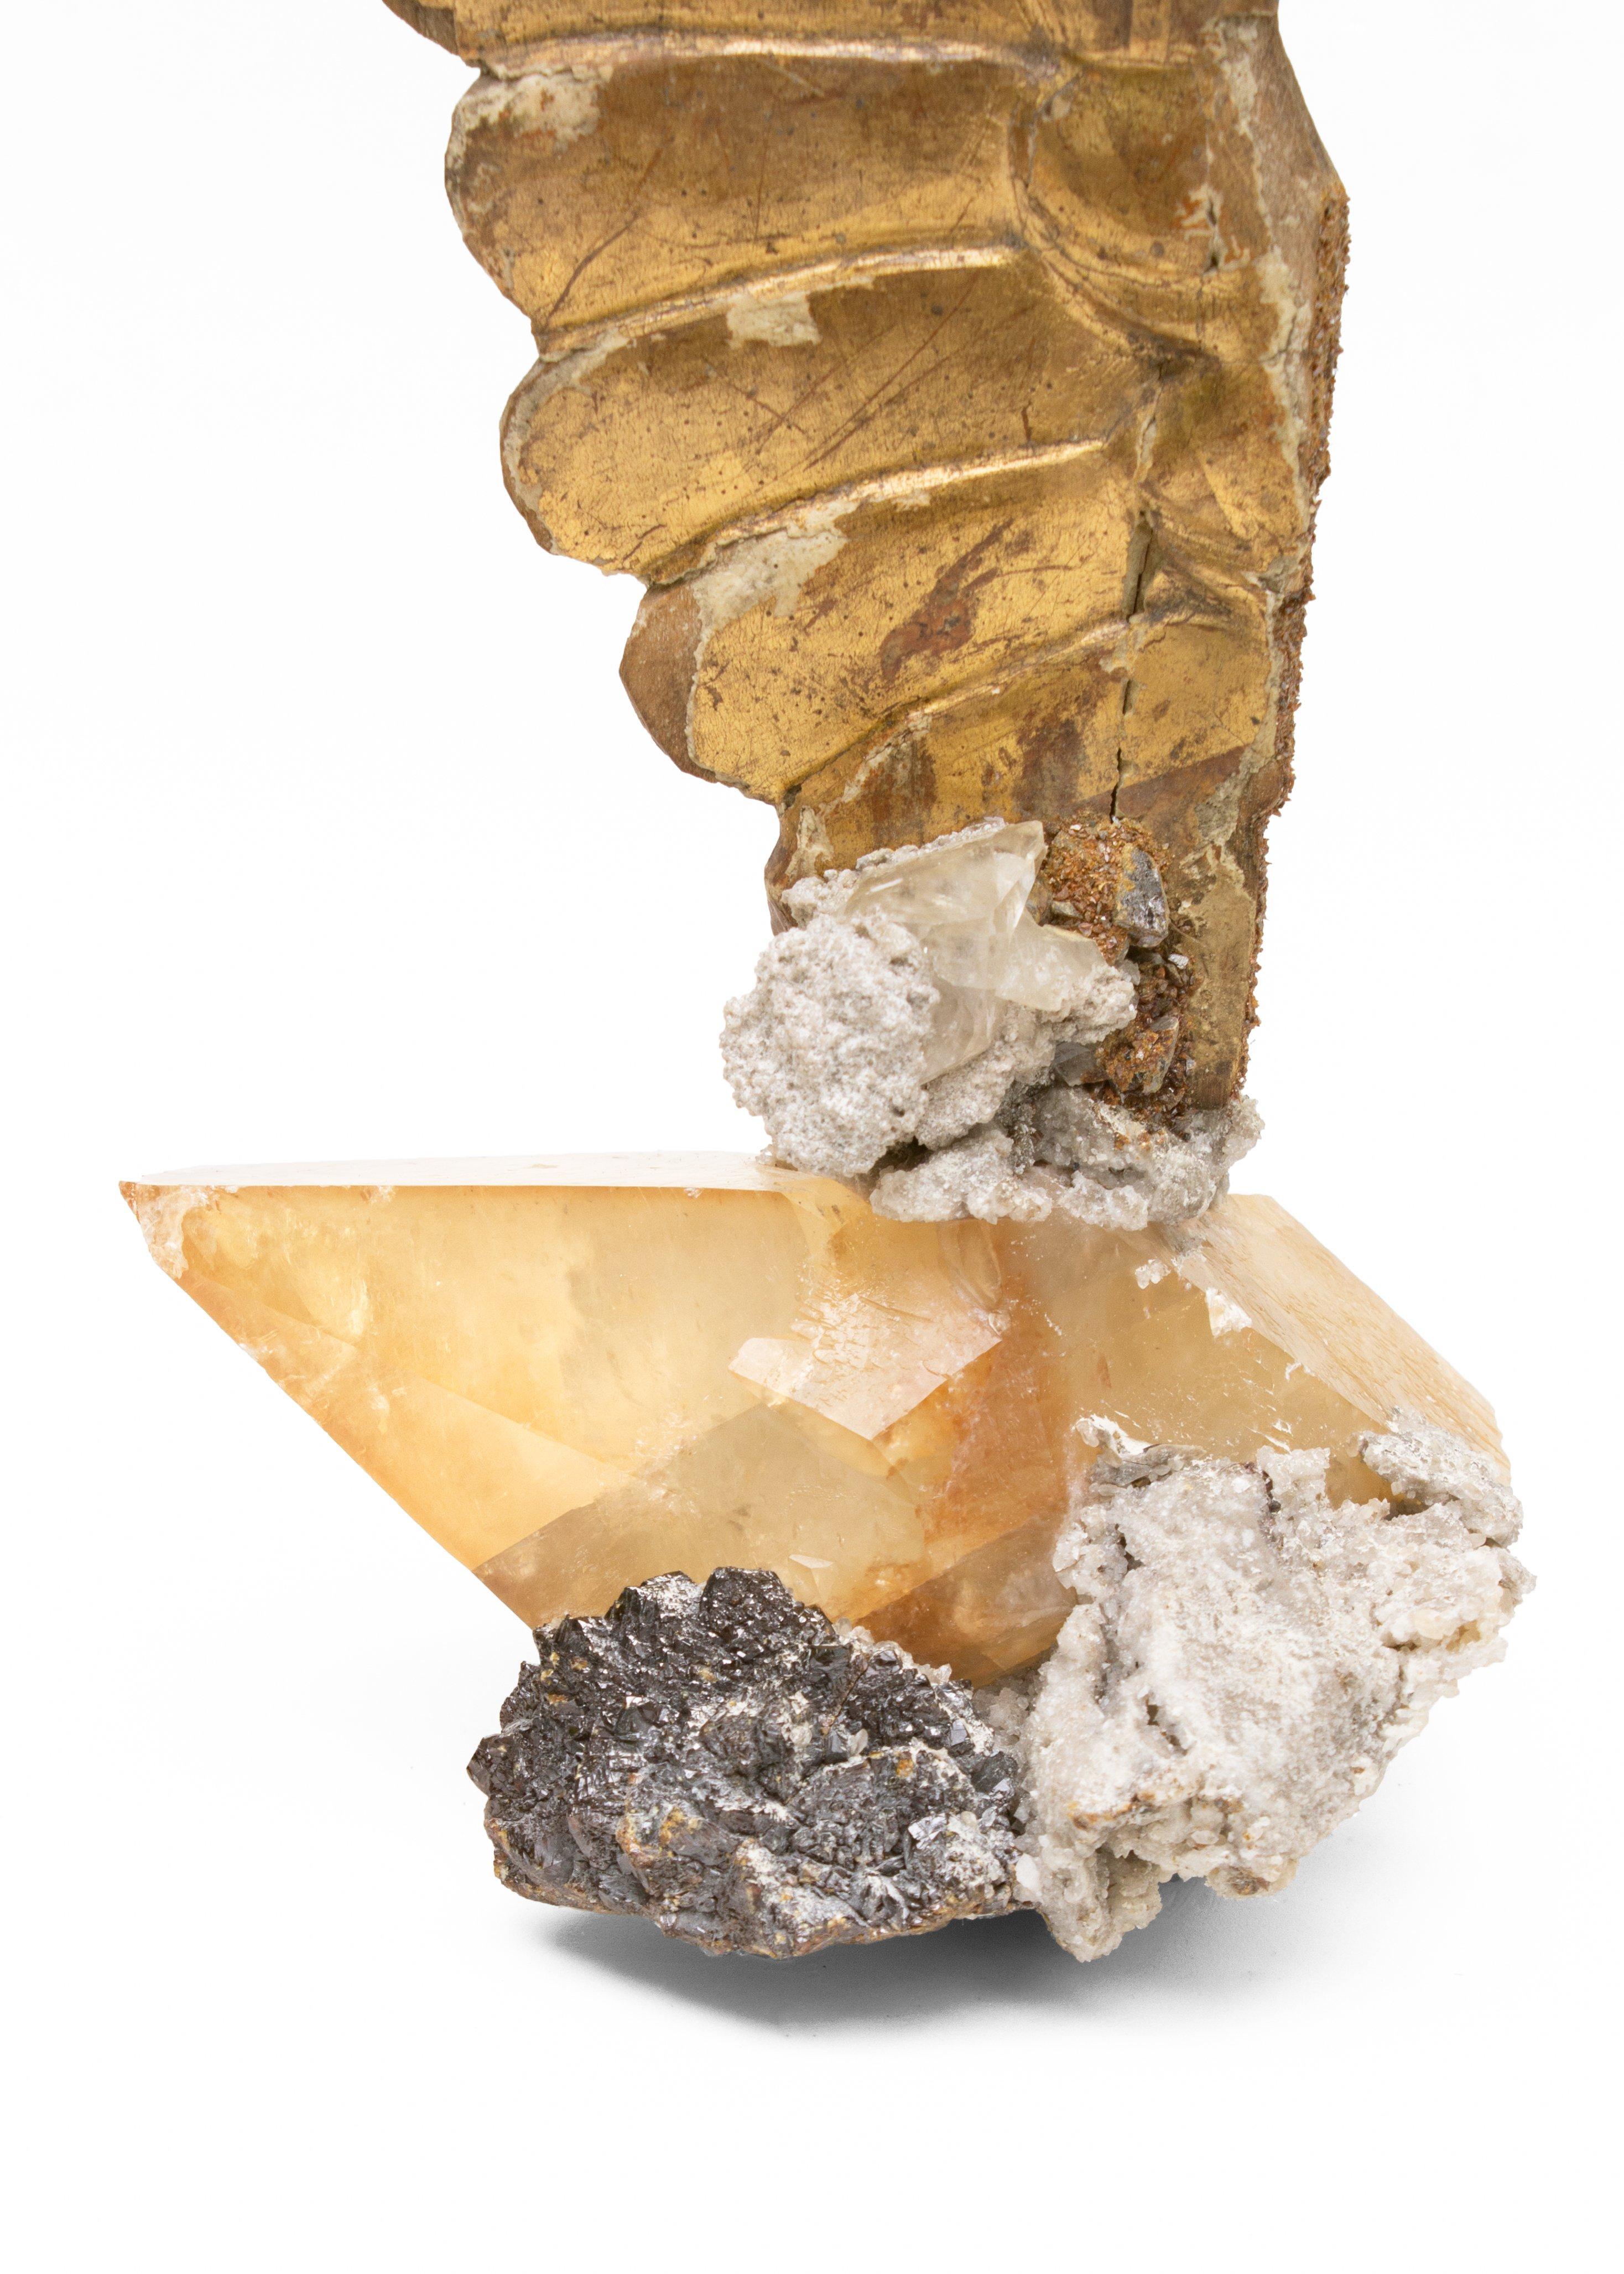 18th century Italian hand-carved angel wing on calcite crystals in a matrix of sphalerite.

The hand-carved gold leaf angel wing is originally from a church in Tuscany. The ecclesiastical artifact is adorned with calcite crystals in a matrix of